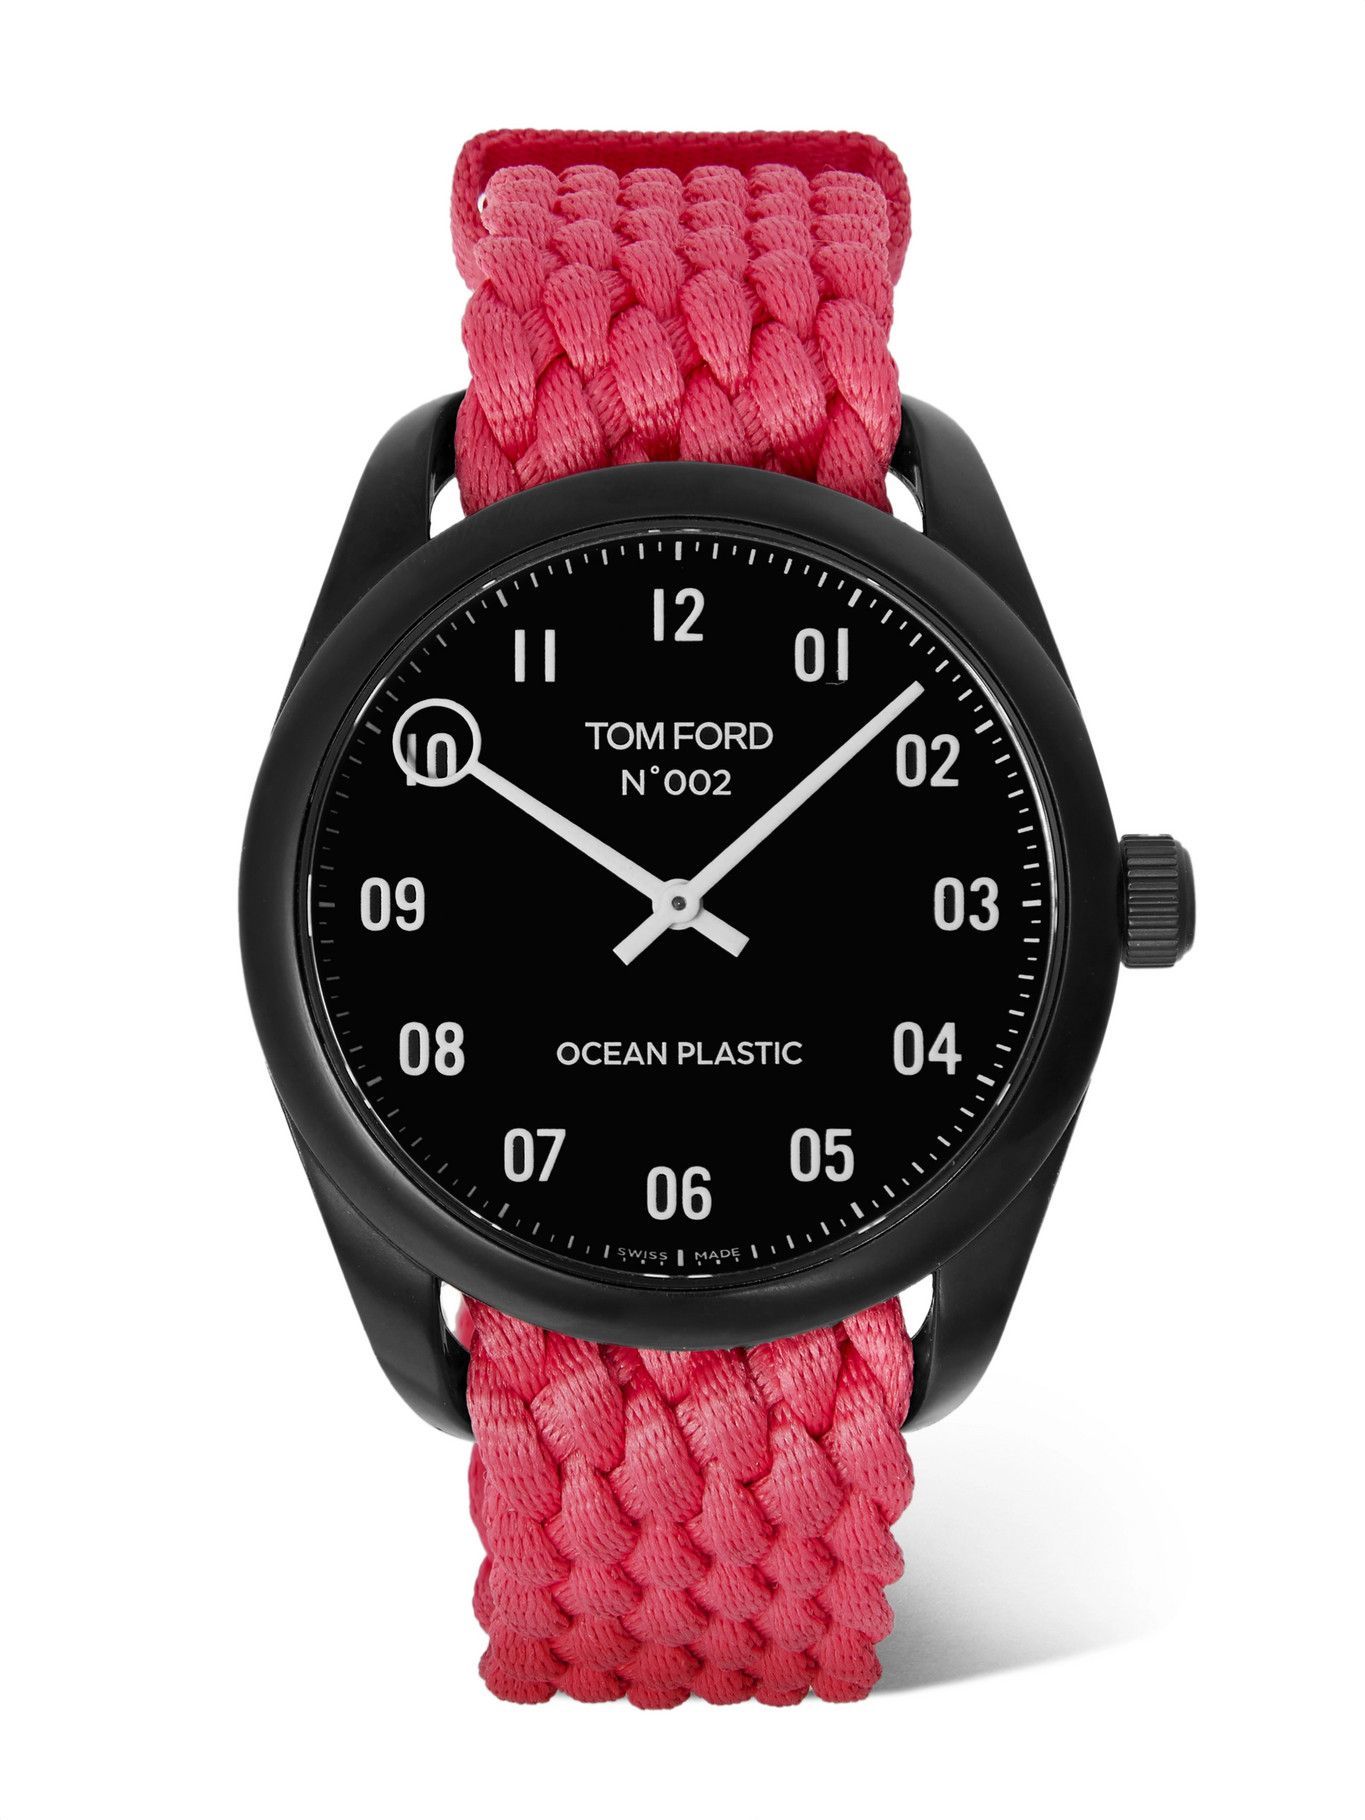 TOM FORD TIMEPIECES - 002 40mm Ocean Plastic Watch Tom Ford Timepieces